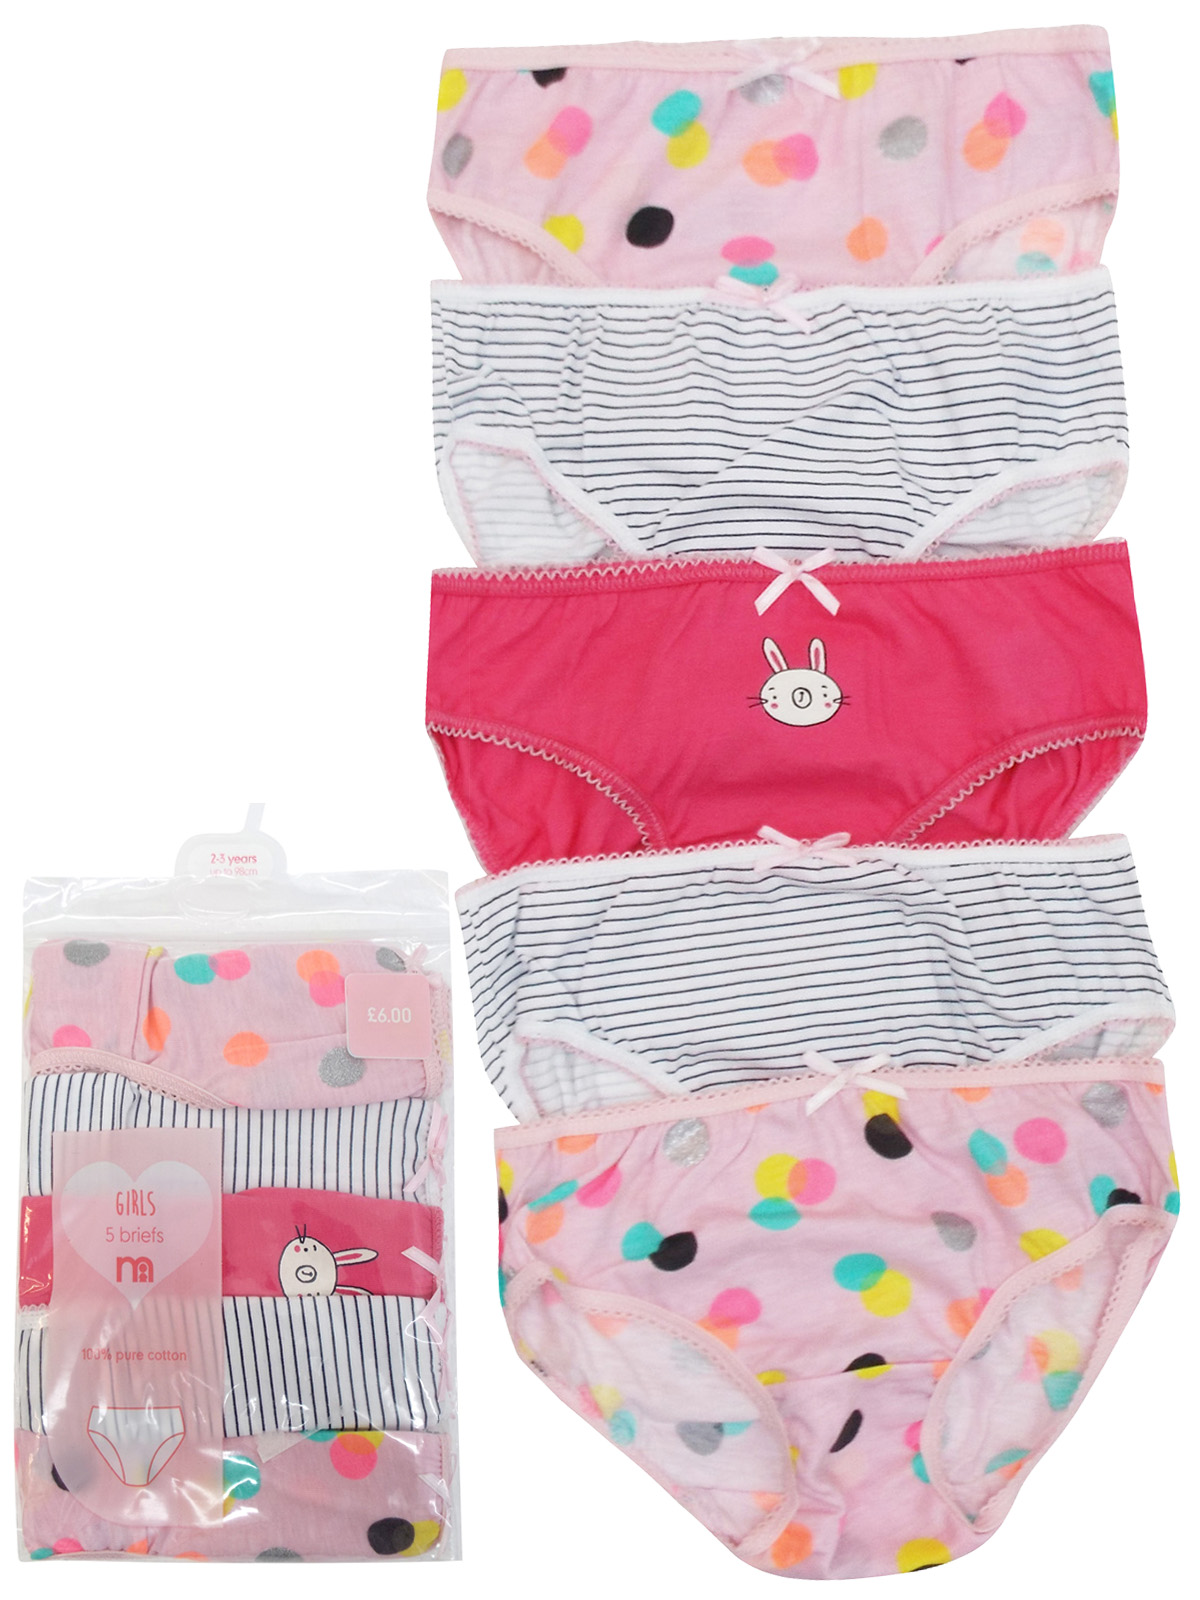 Wholesale Mothercare clothing and lingerie - - M0THERCARE PINK 5